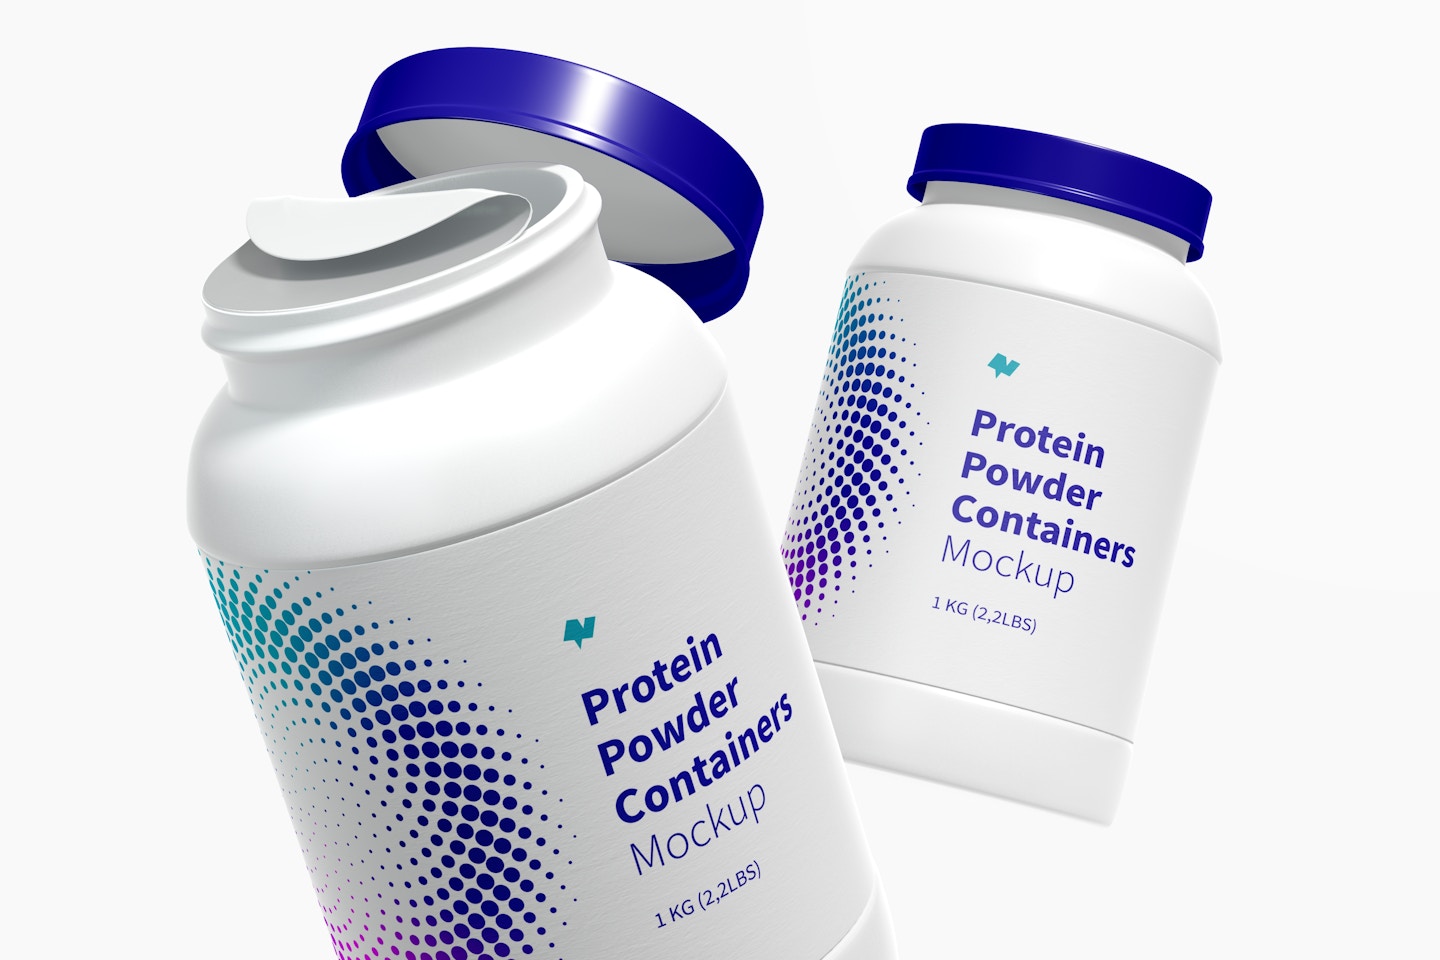 Protein Powder Container Mockup, Floating